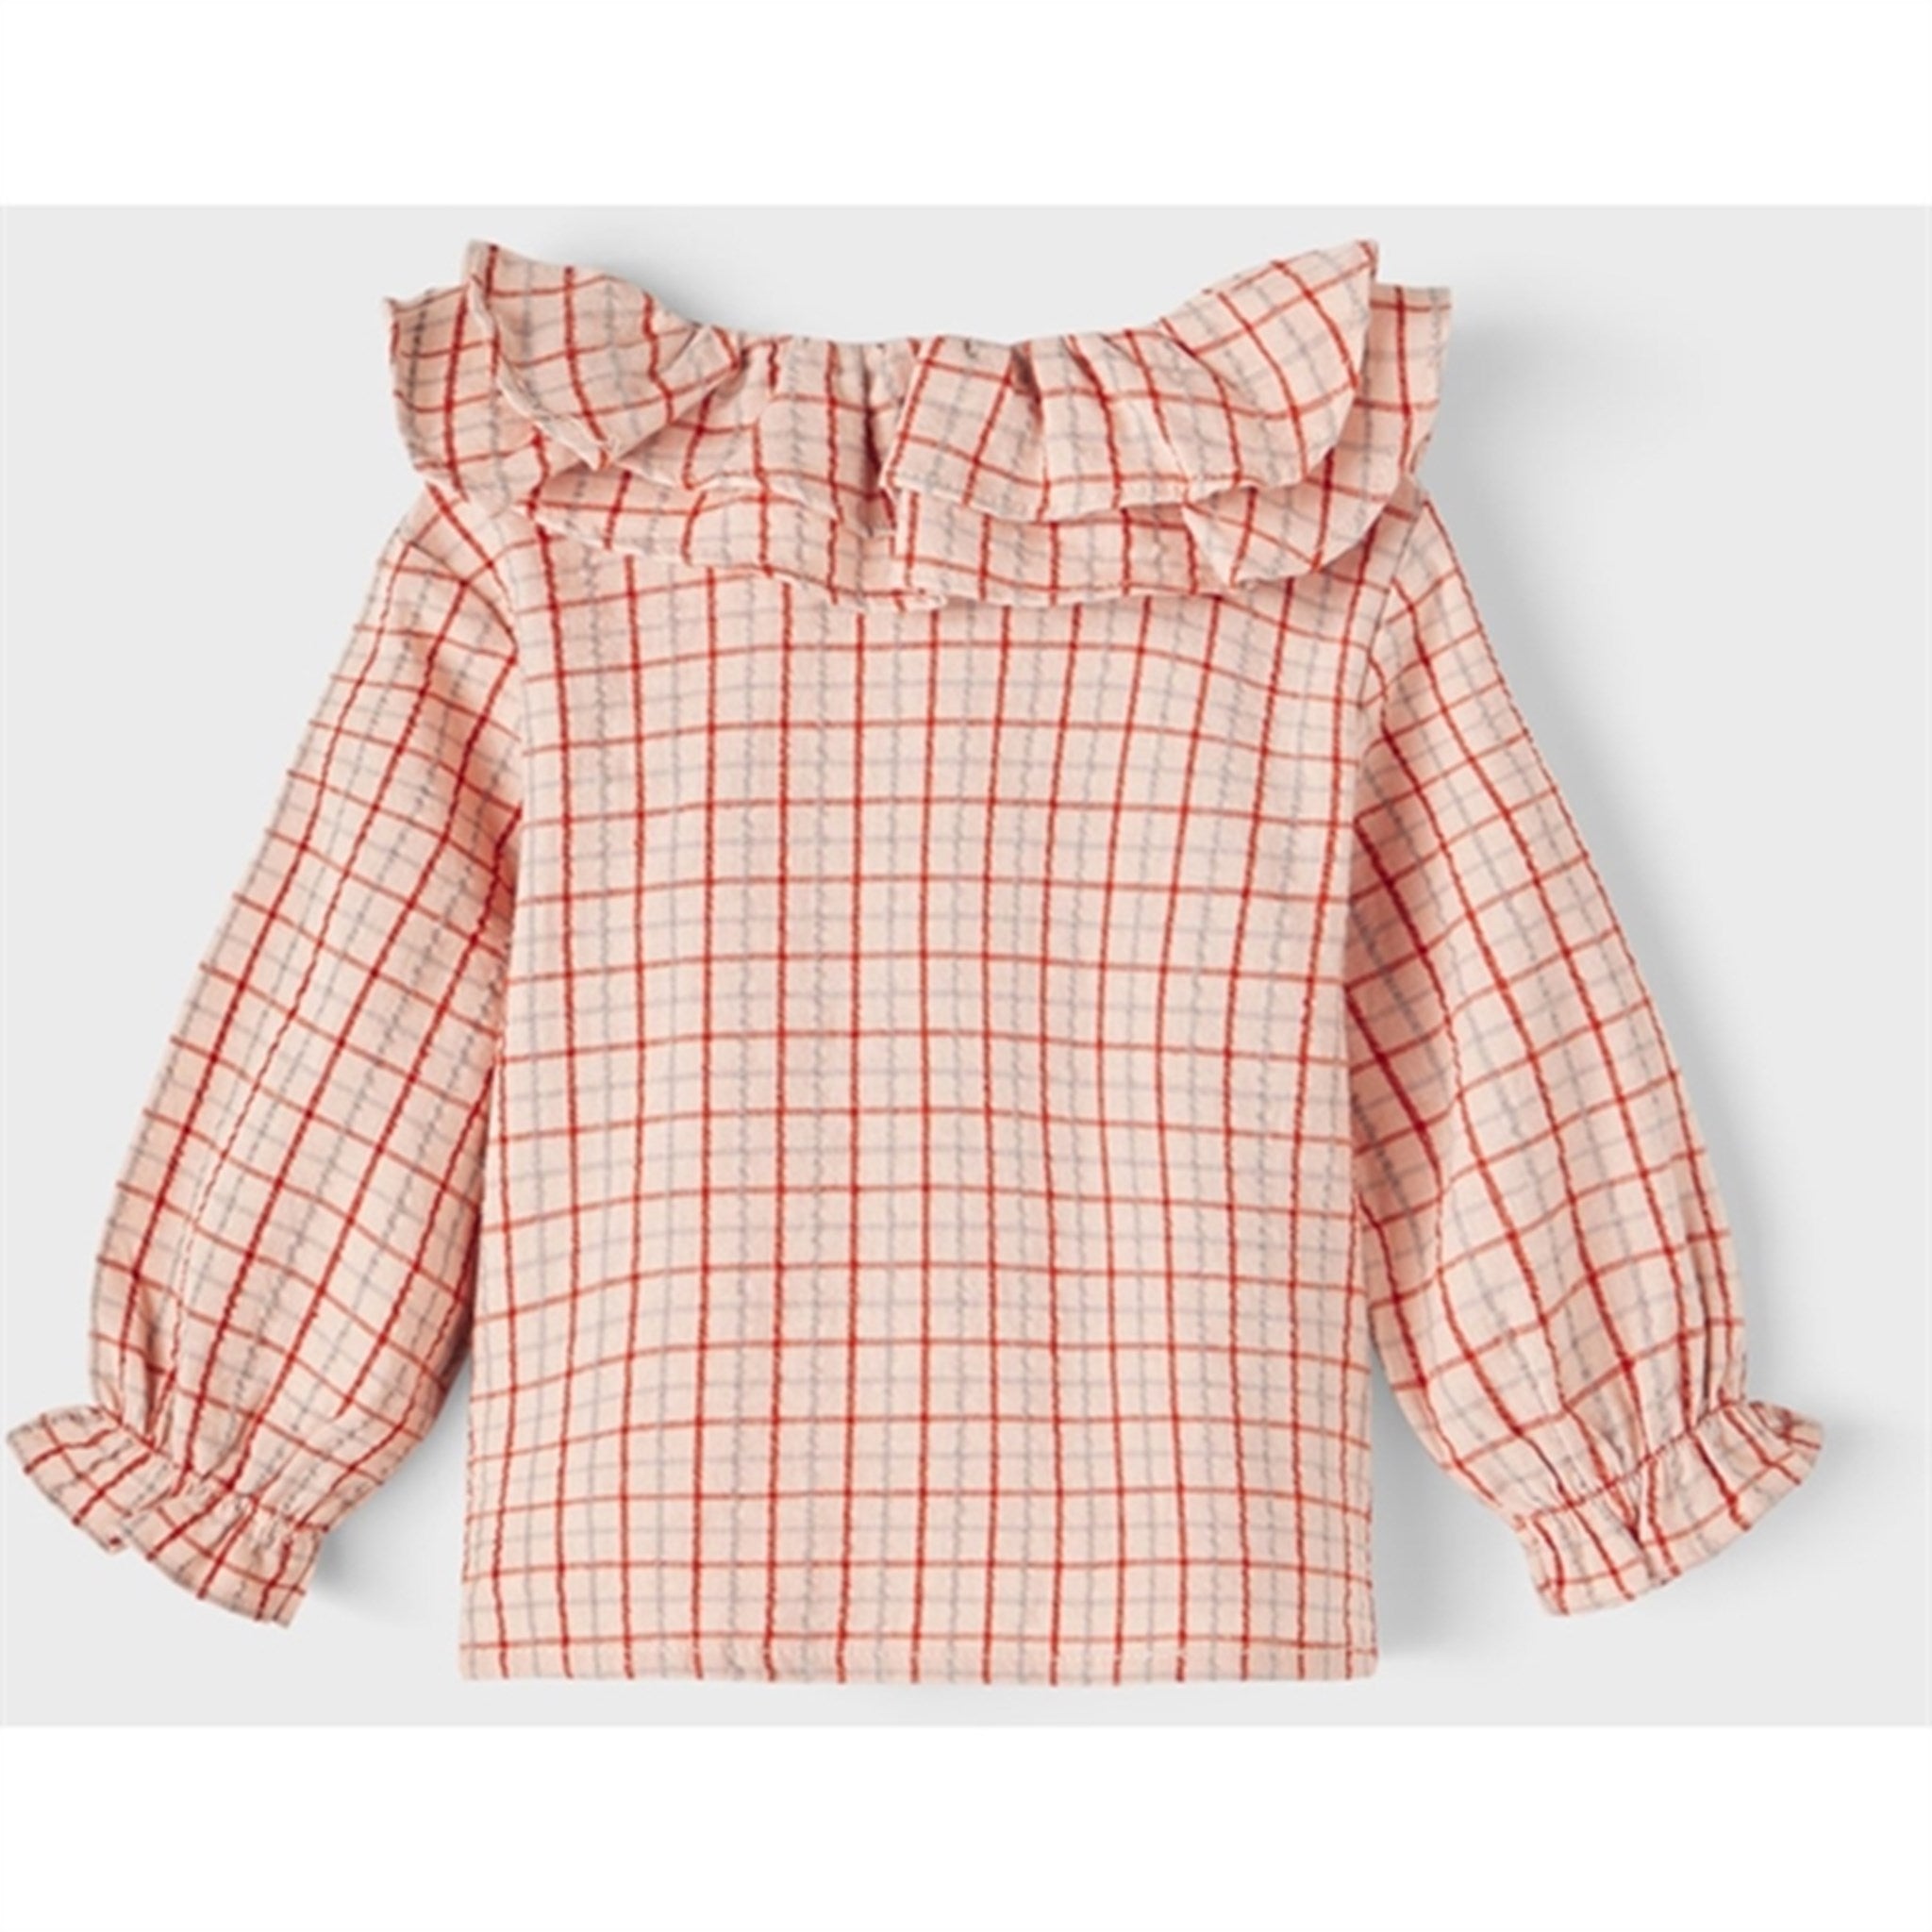 Lil'Atelier Baked Clay Lucy Shirt 4